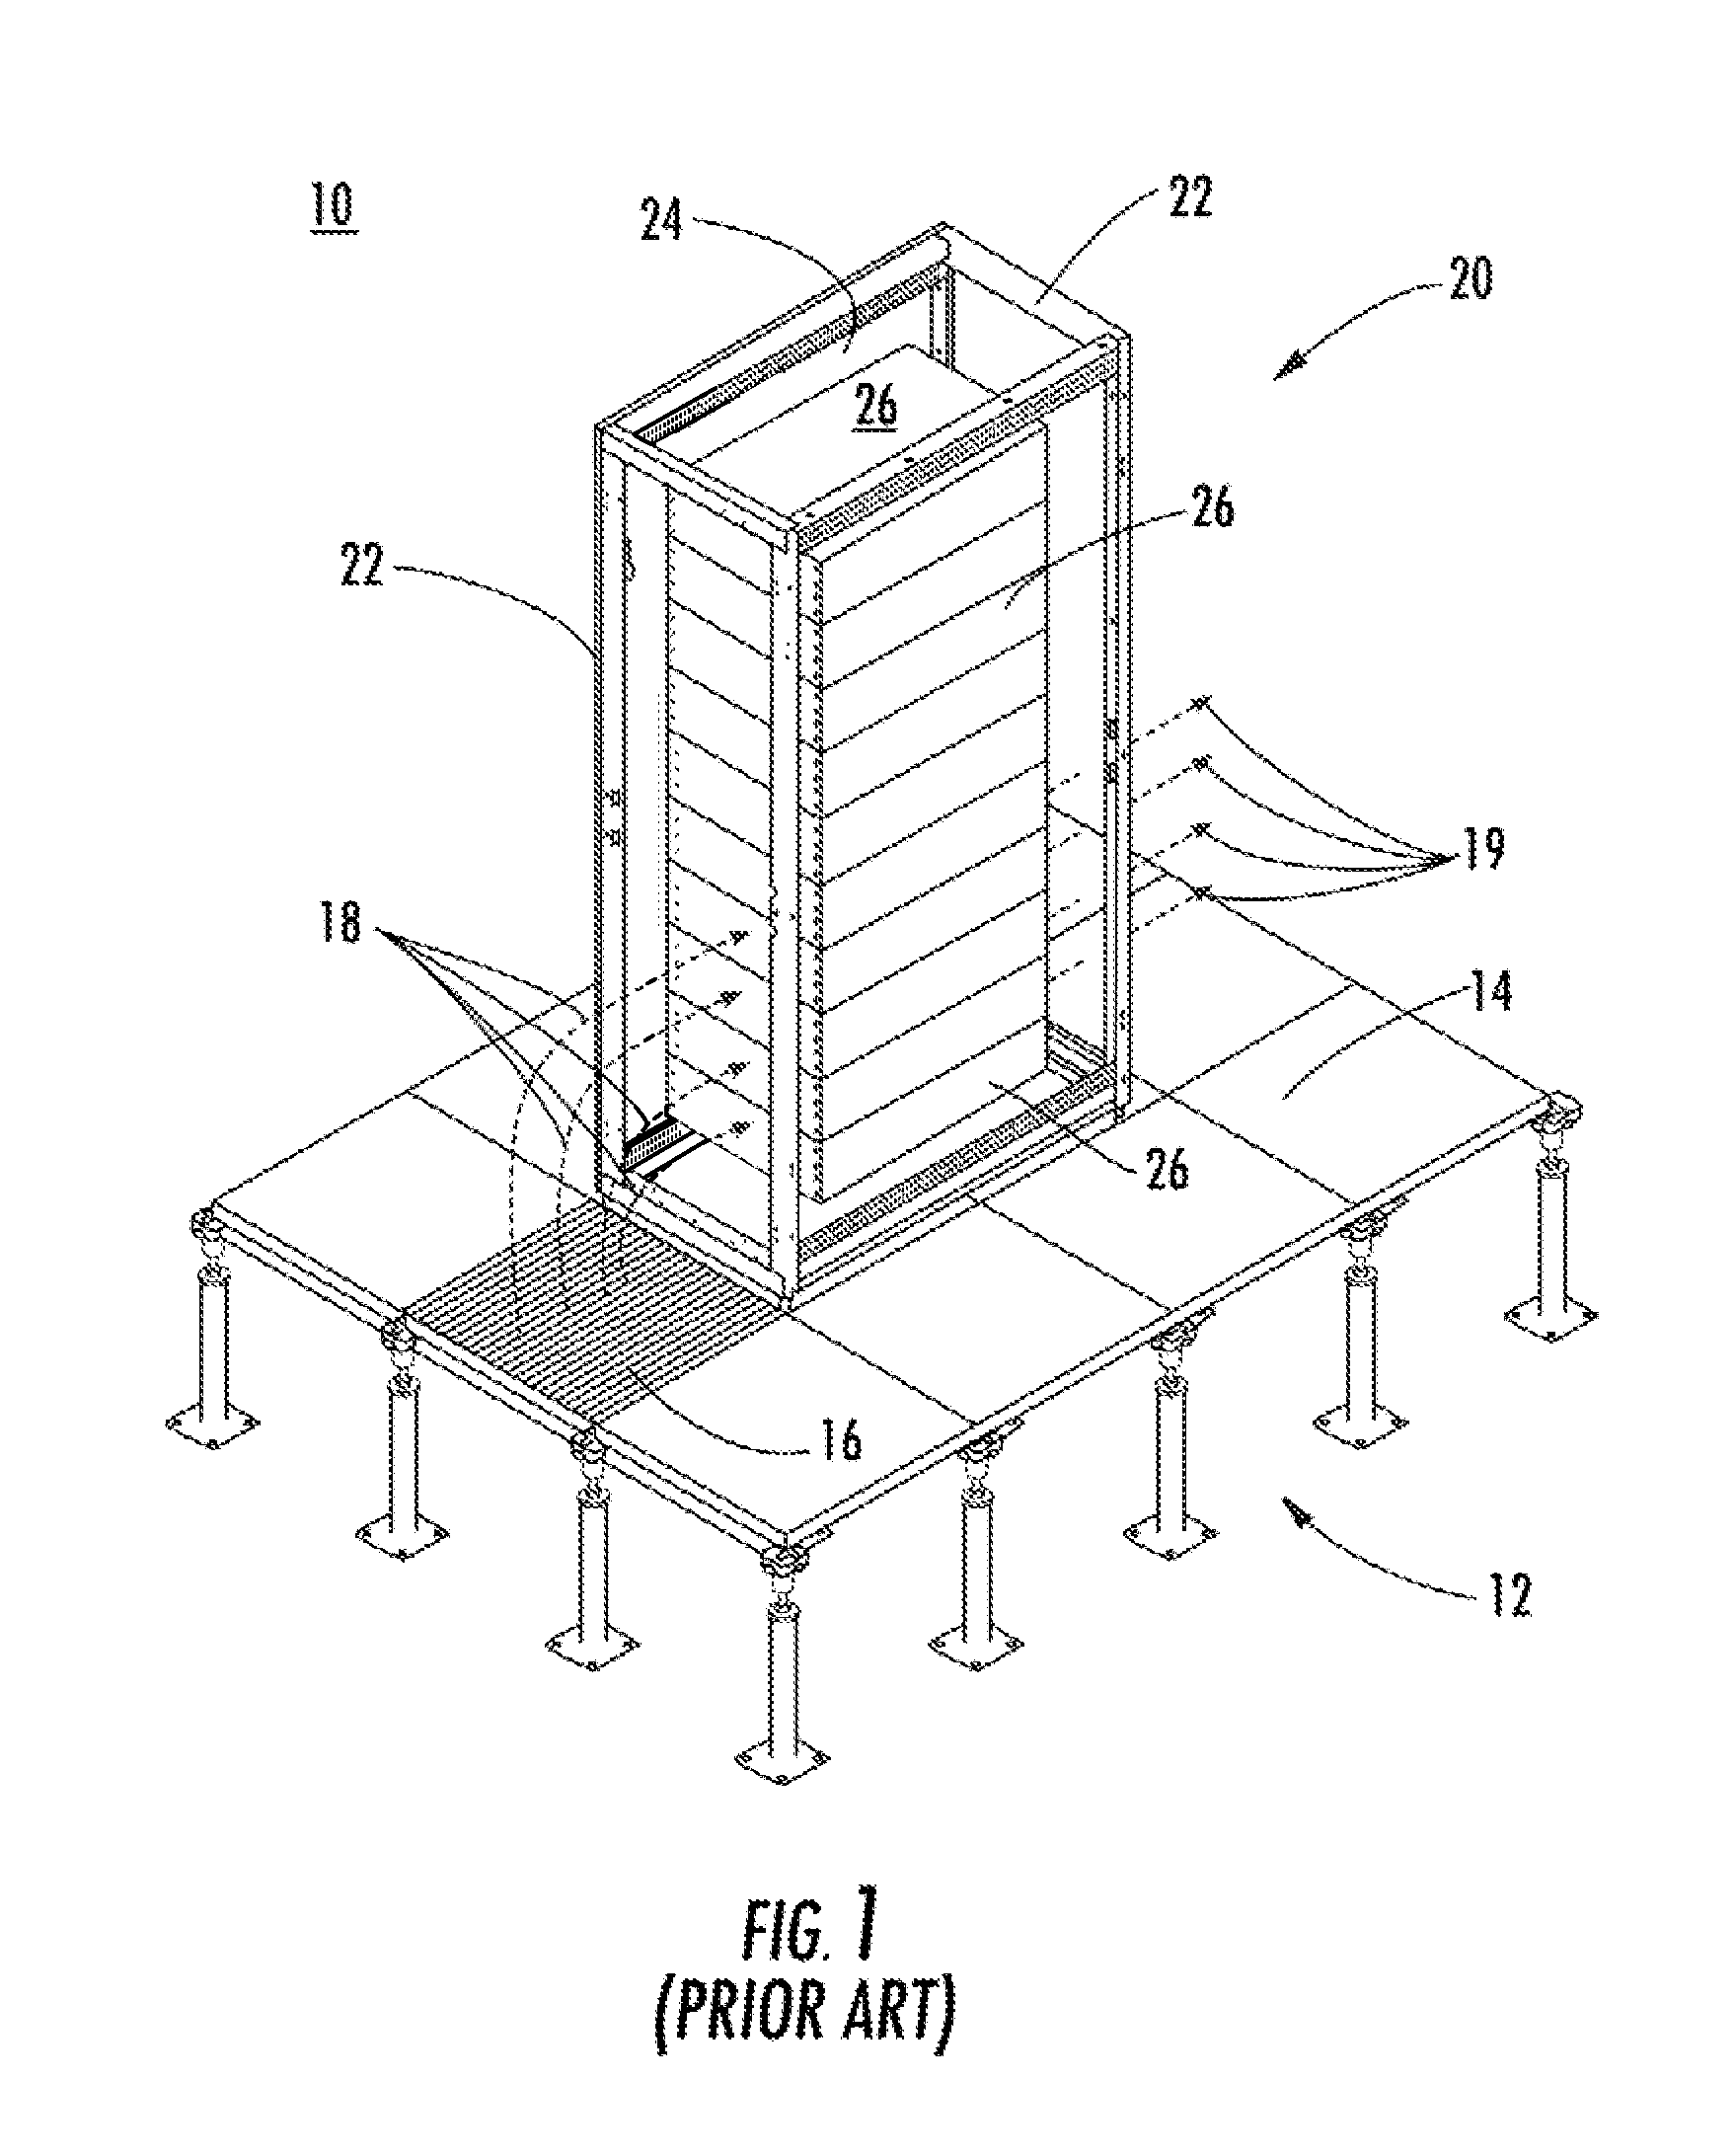 Selectively routing air within an electronic equipment enclosure